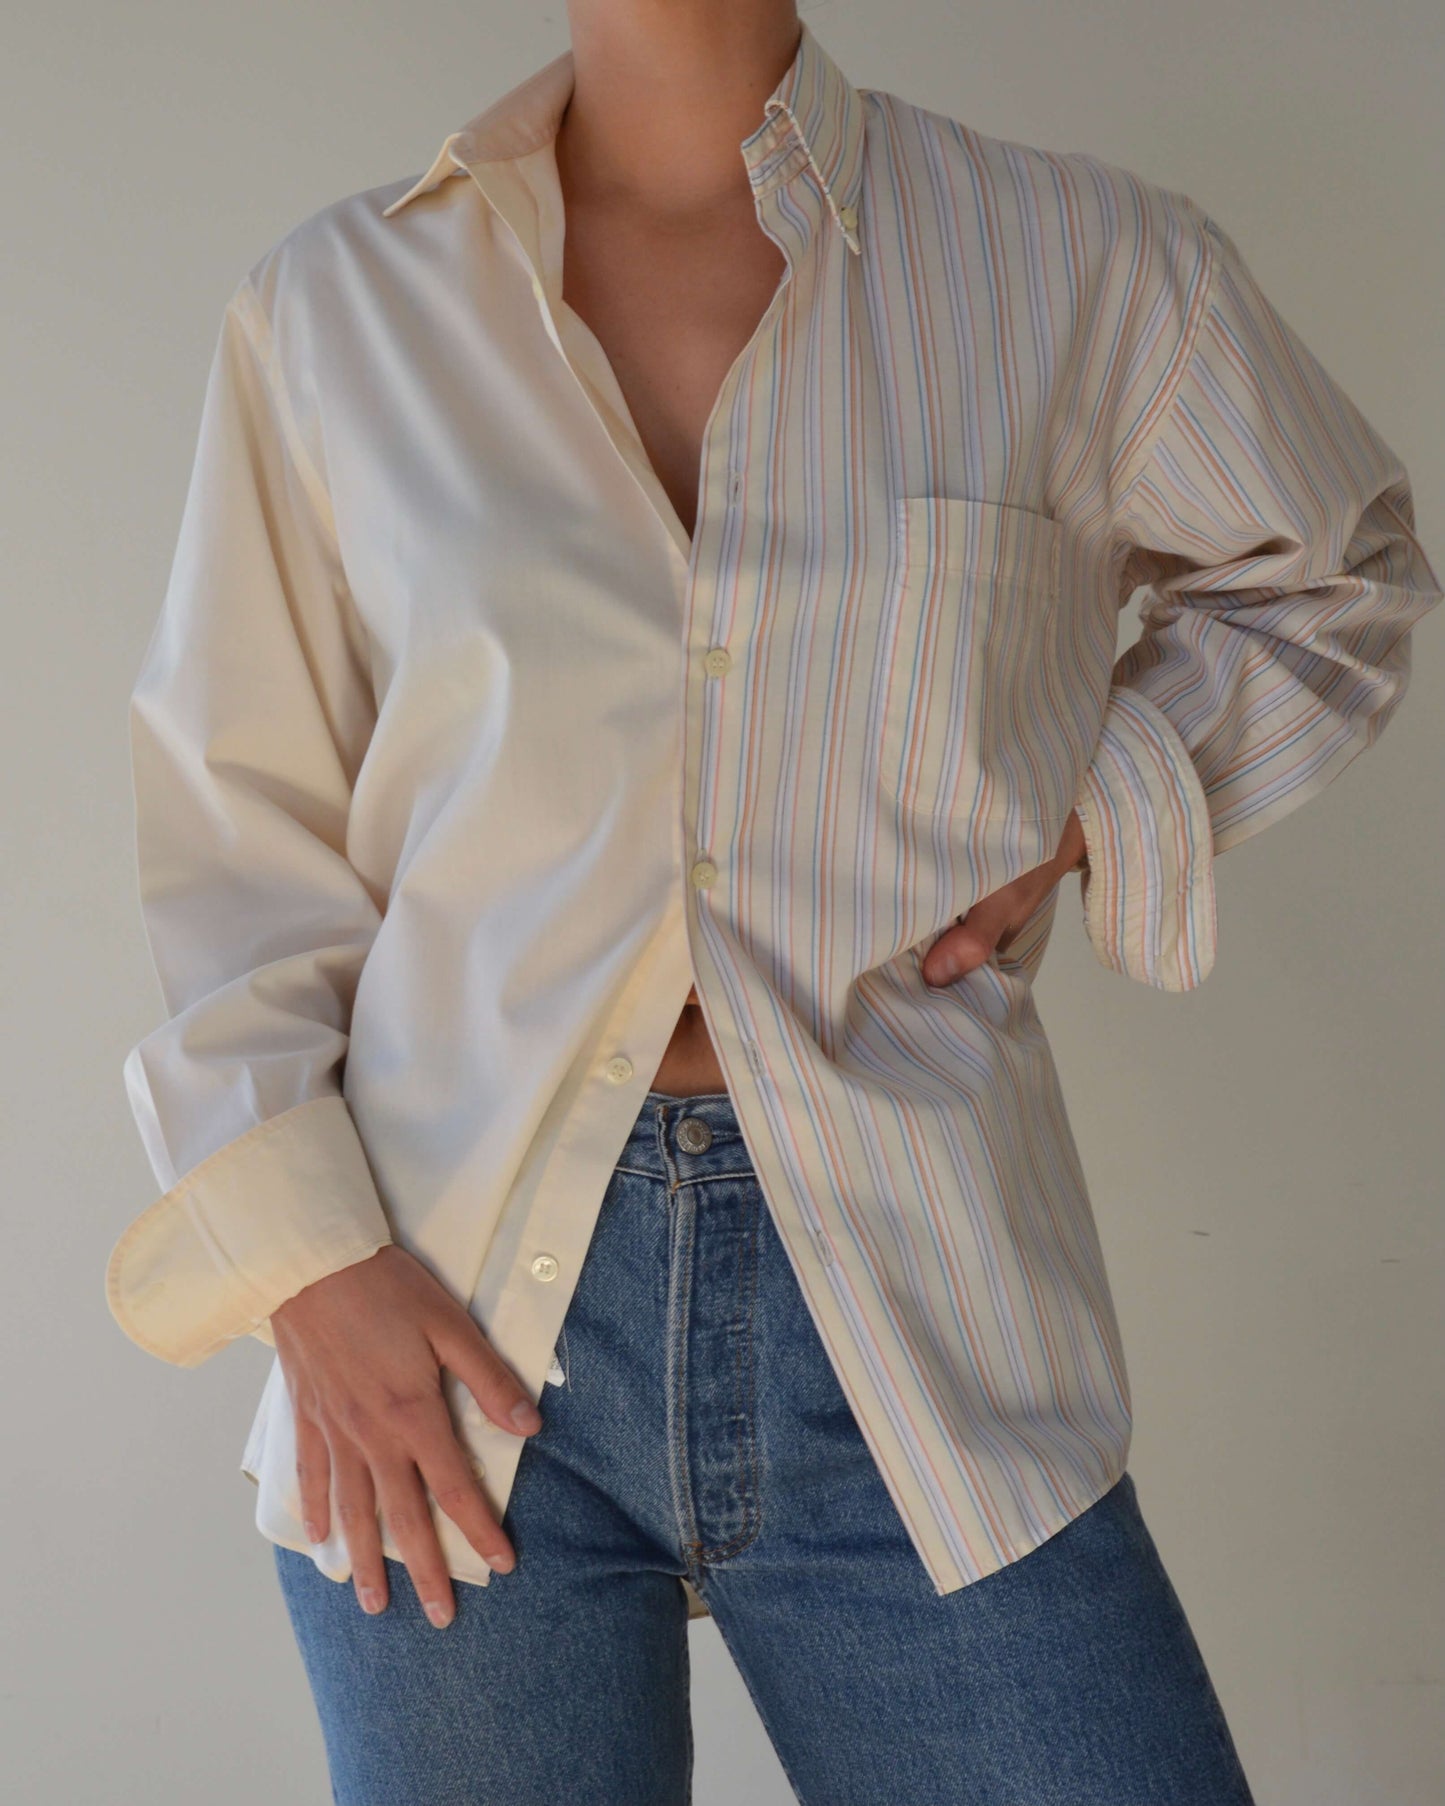 DUO Shirt - breeze stripes on yellow (S/L)